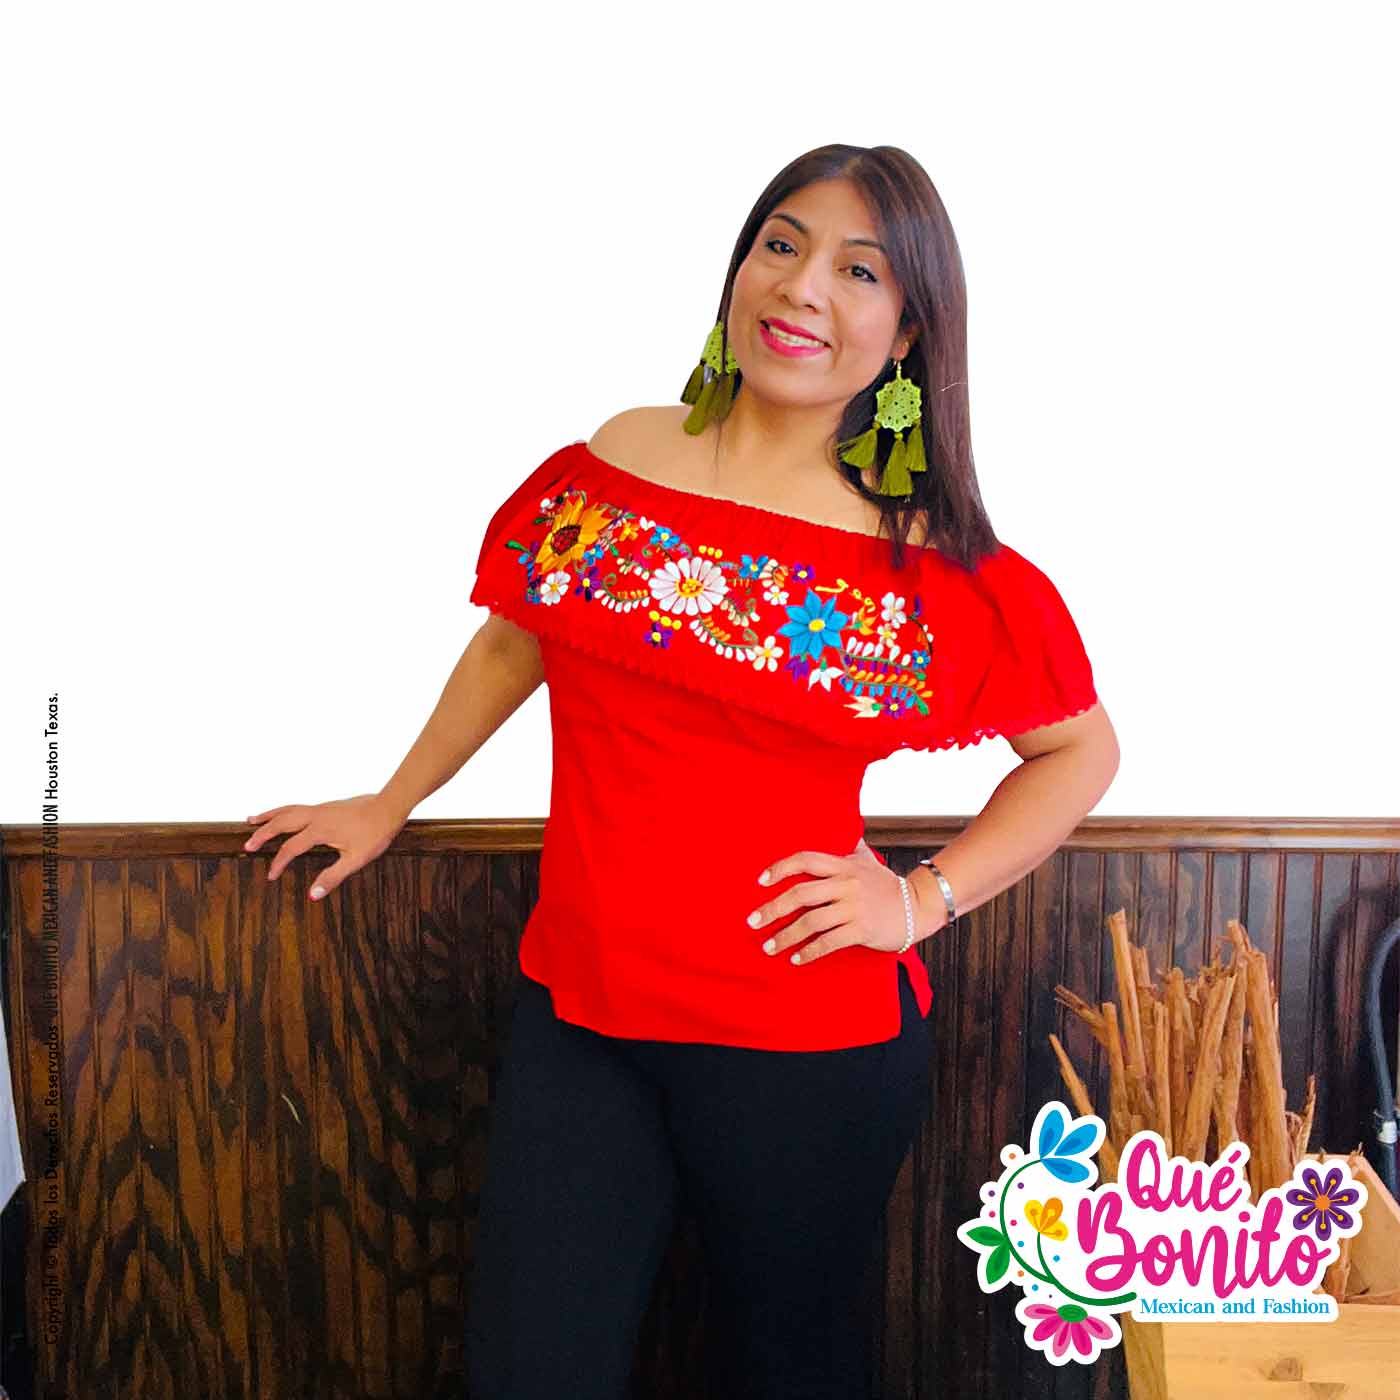 Campesina red Top Que Bonito Mexican and Fashion